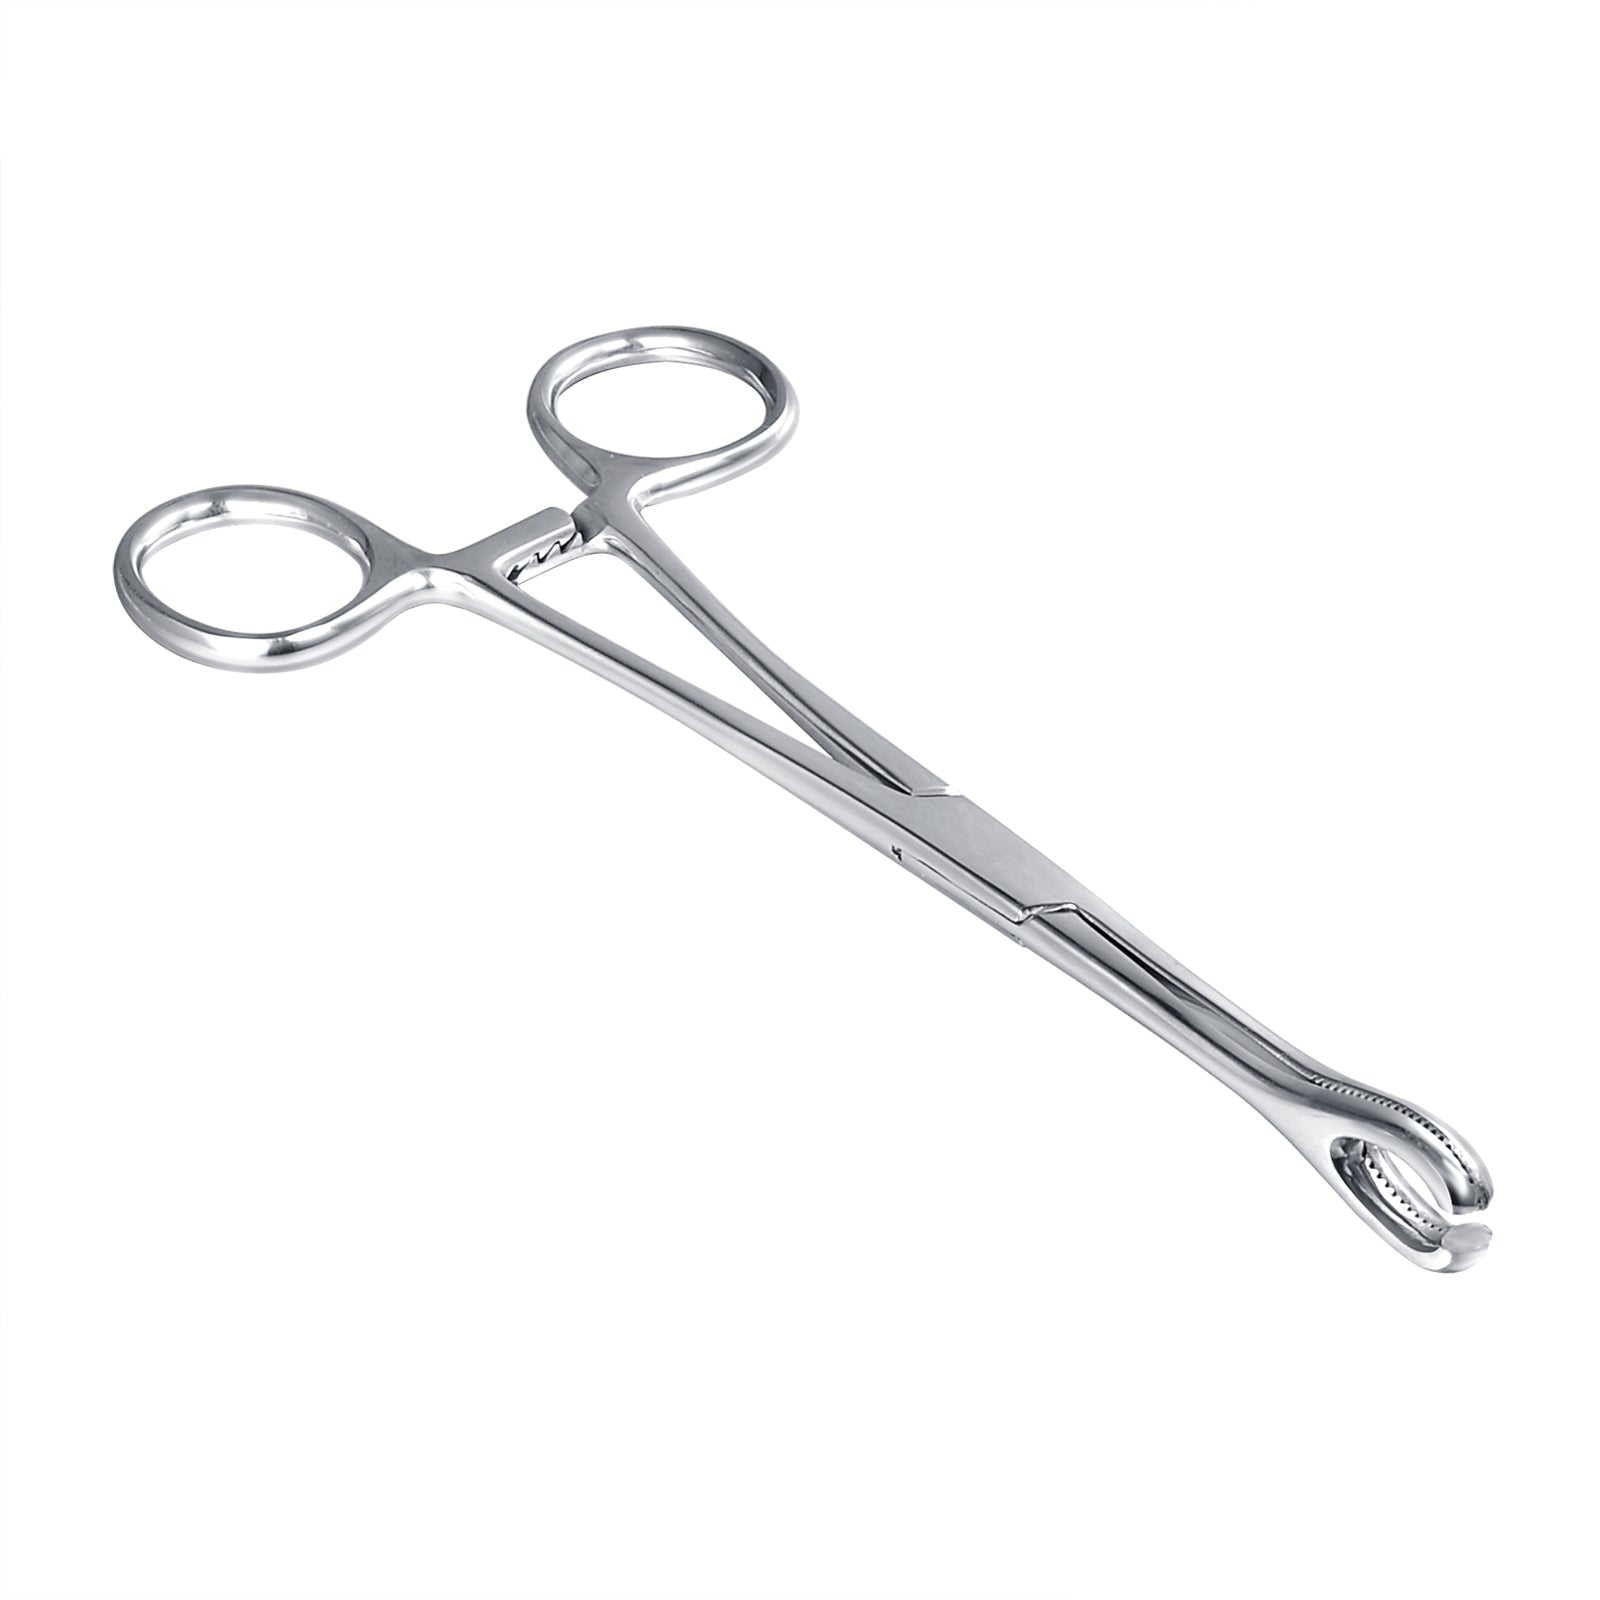 7' Round Slotted Locking Foerster Sponge Forceps, 316L Surgical Steel Clamp Forceps Pliers with Needles For Body Skin Piercing Belly Ear Tongue Septum Lip Piercing